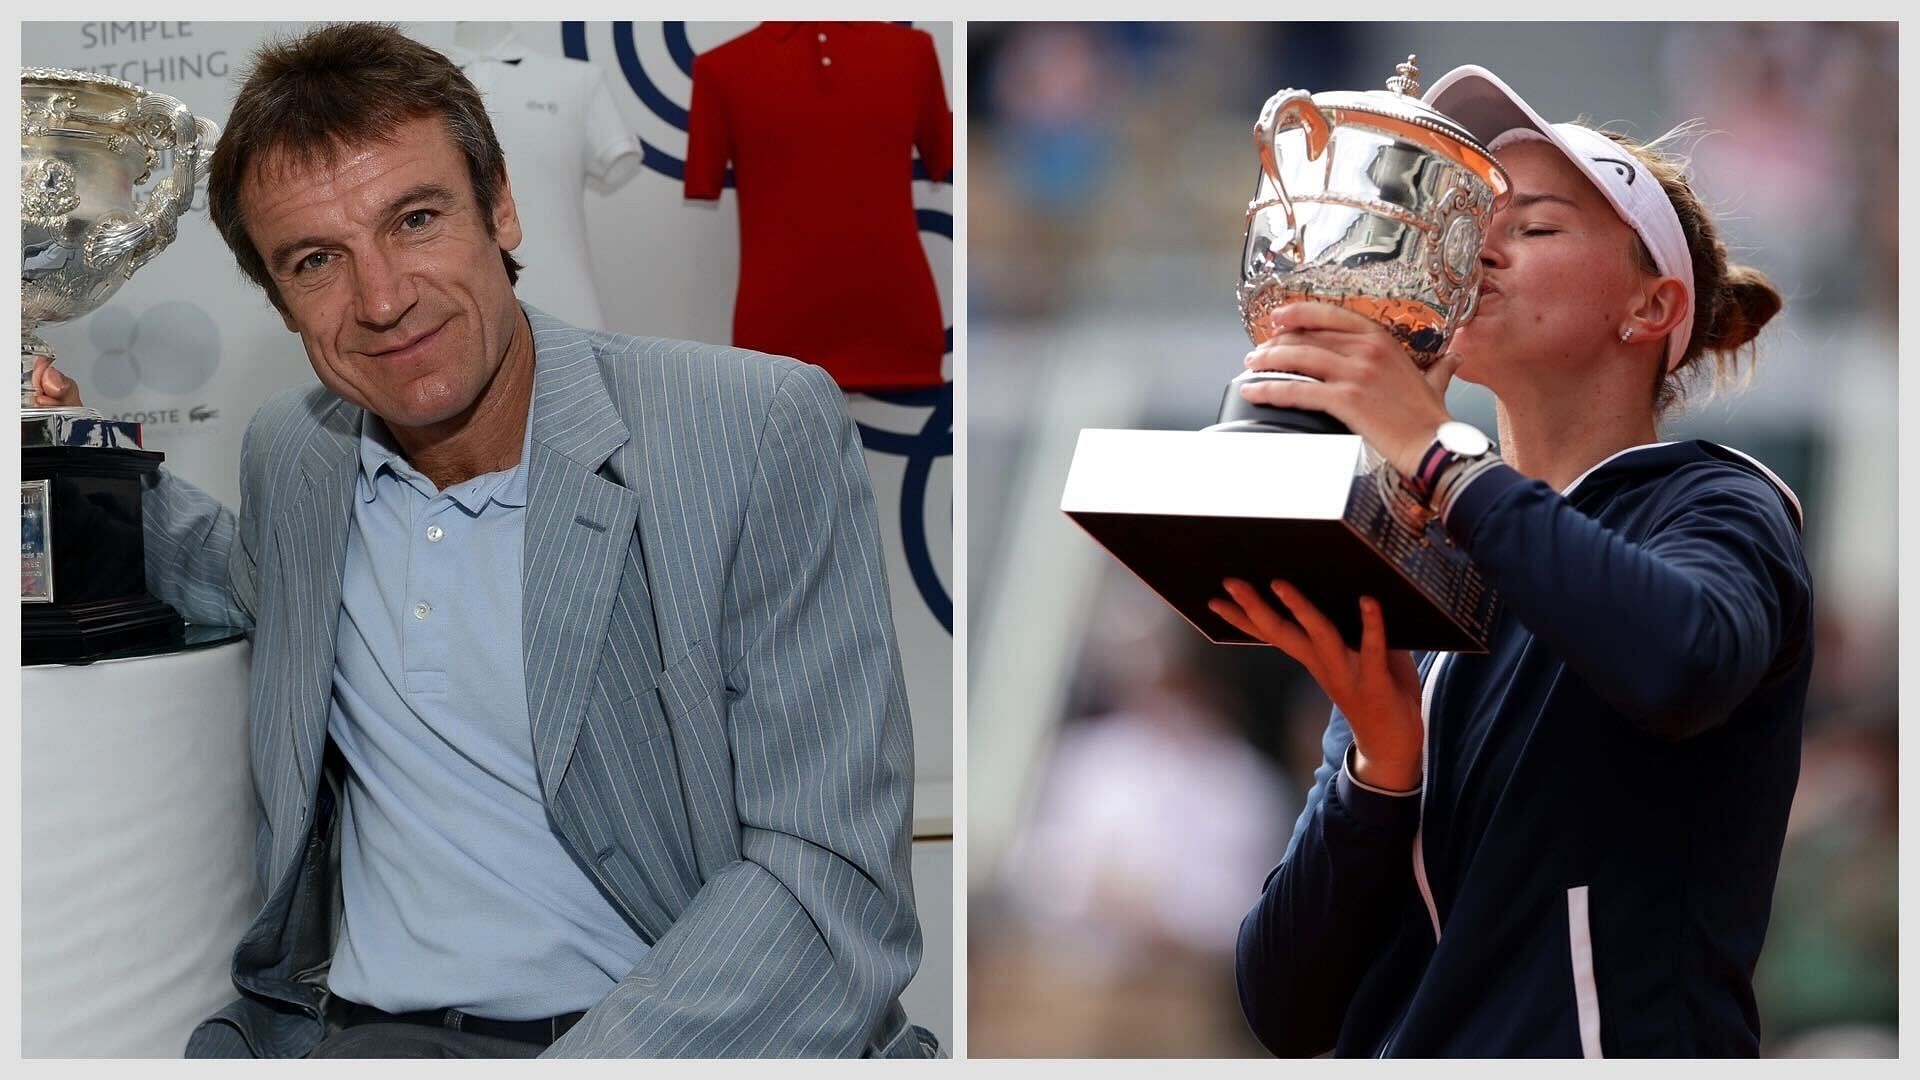 Mats Wilander and Barbora Krejcikova are among the unseeded players to win the French Open.